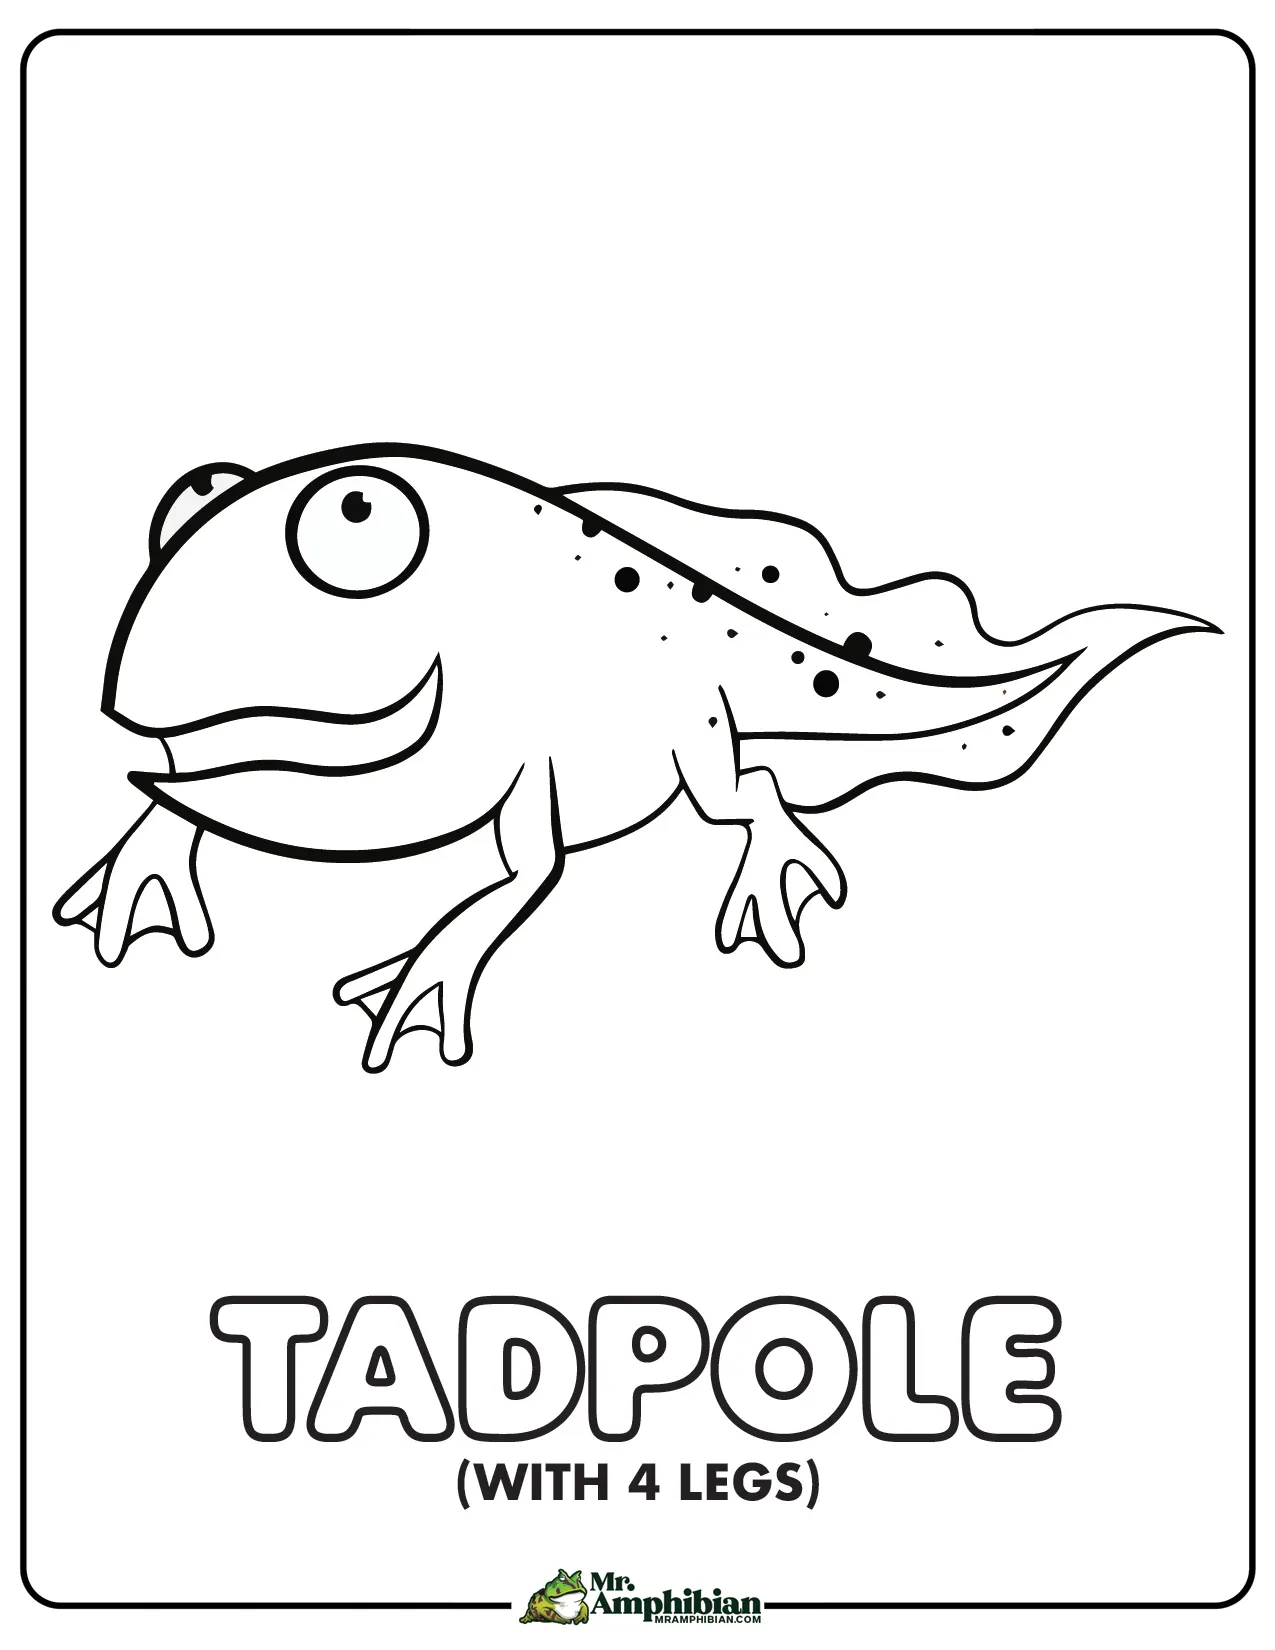 Tadpole Coloring Page 03